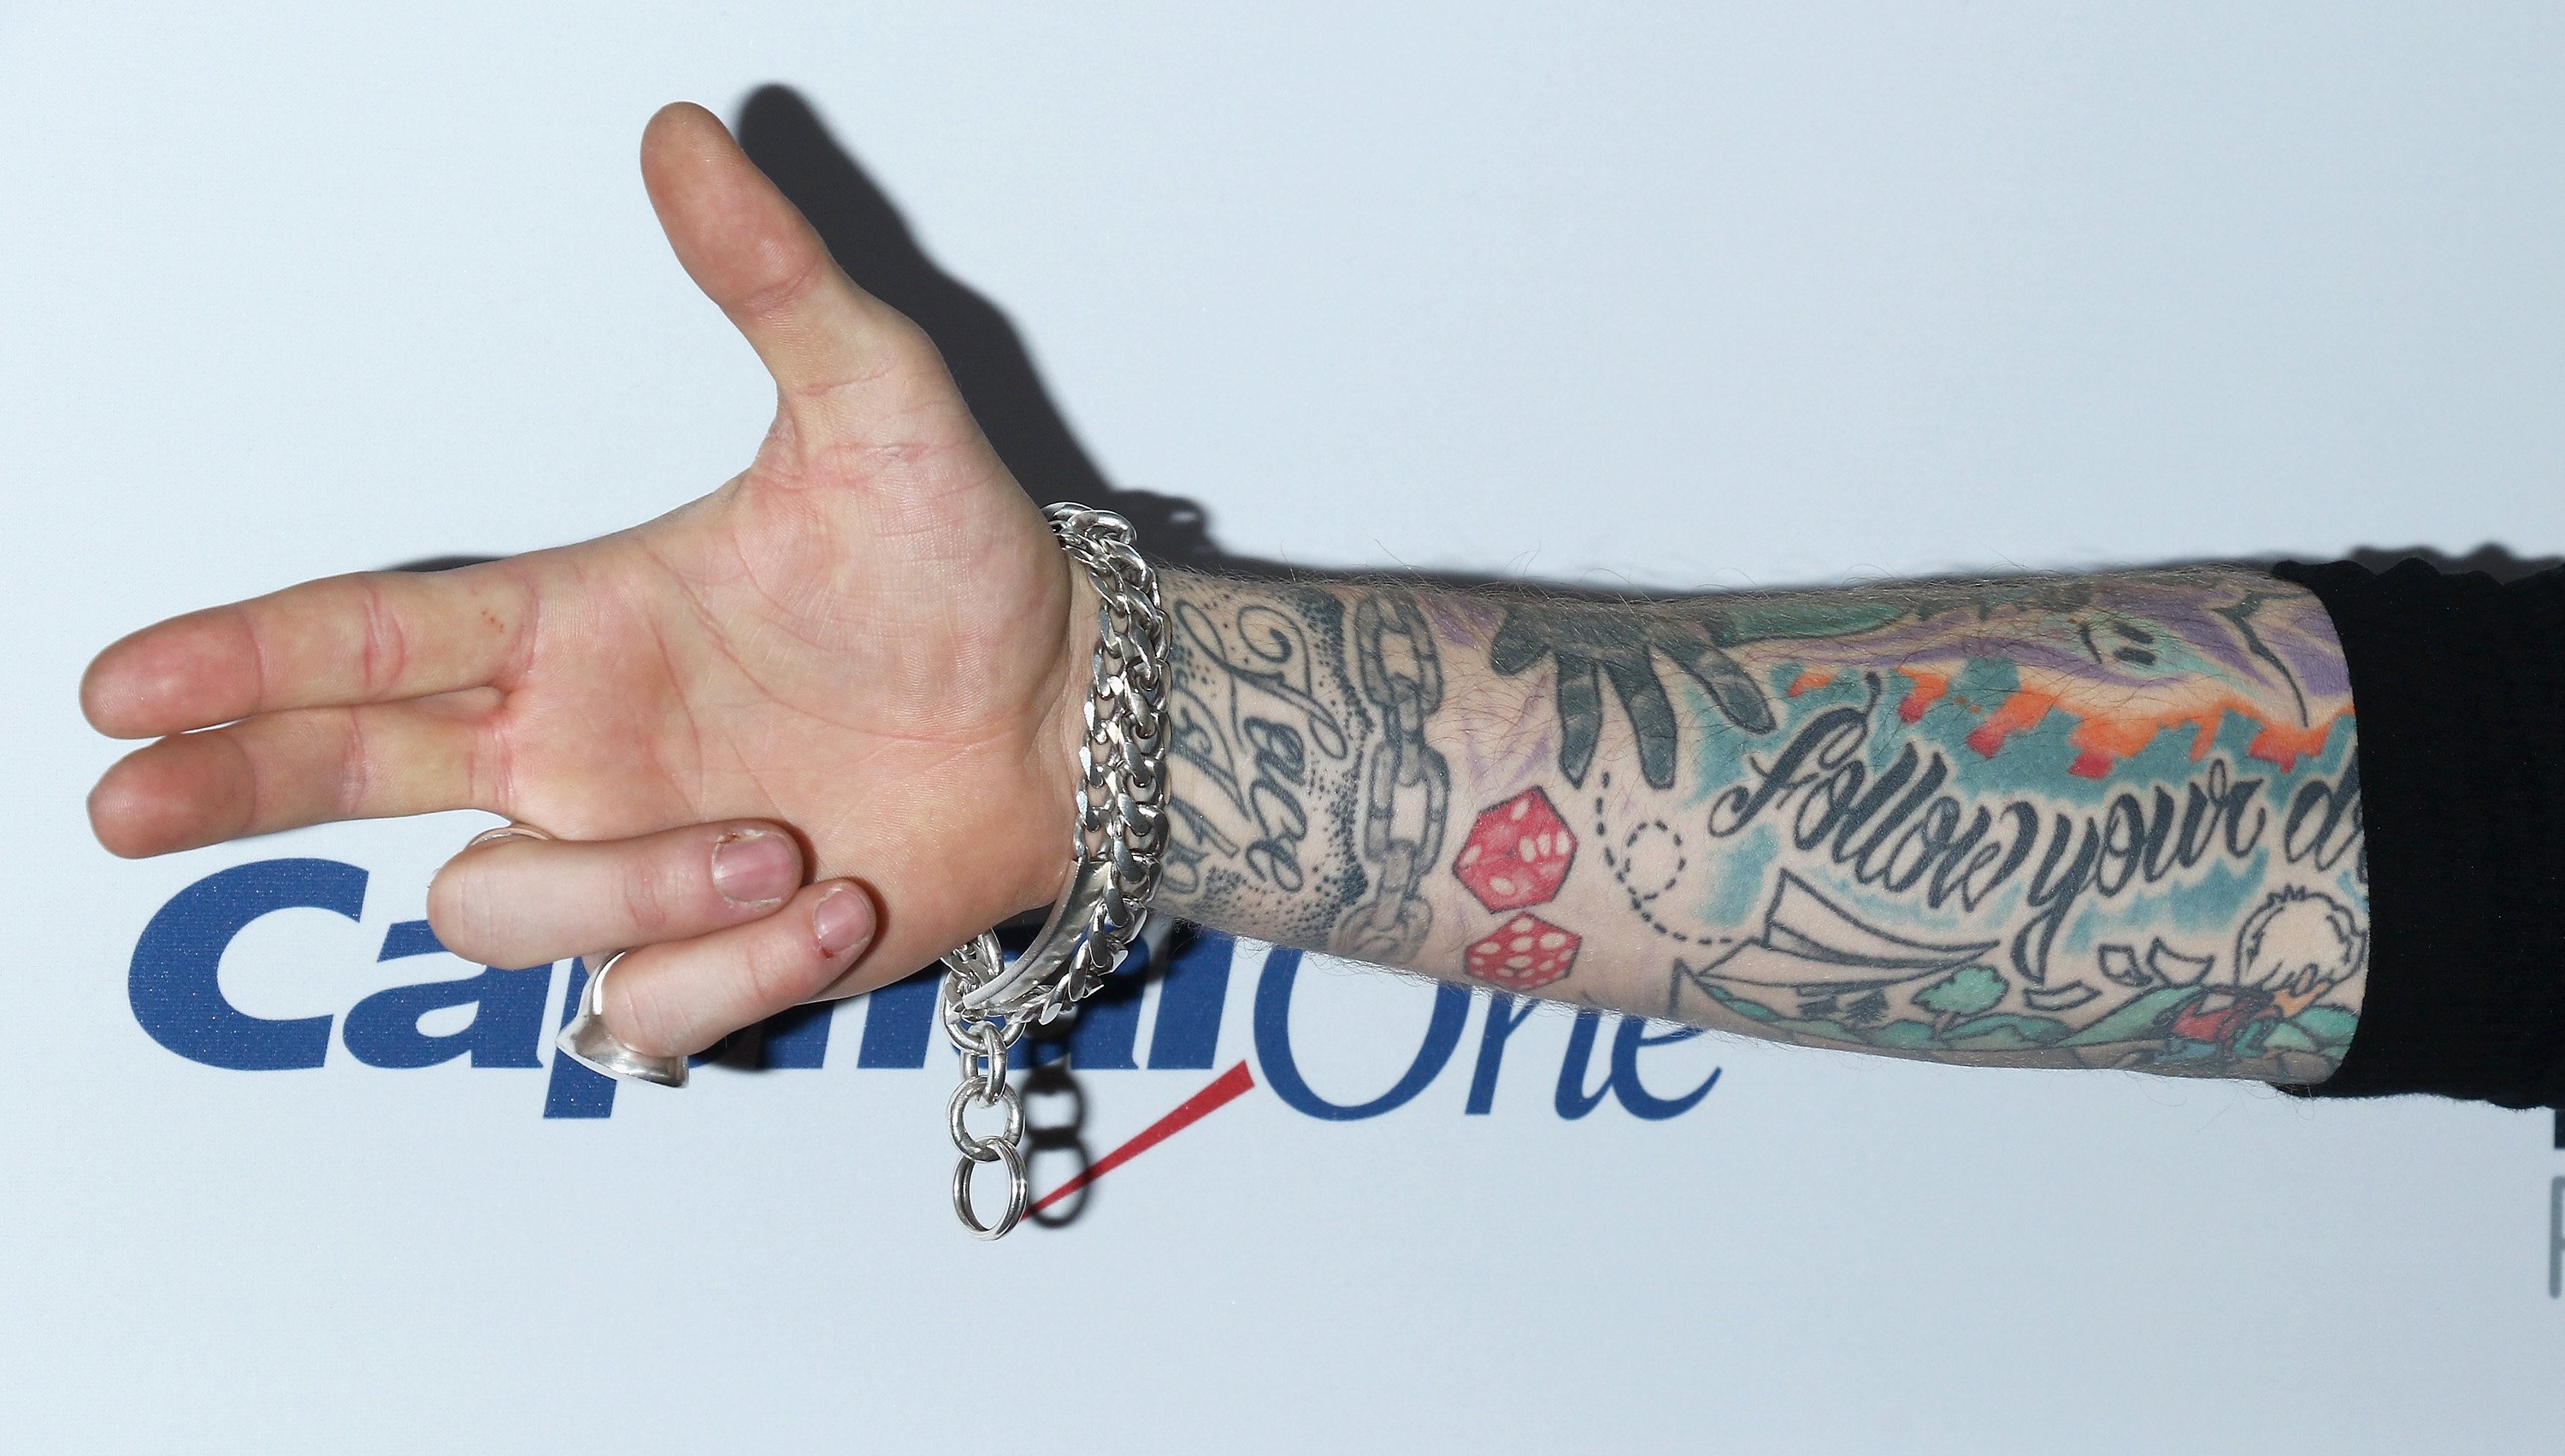 A closer look at Machine Gun Kelly's "Lace up" and "Follow Your Dreams" tattoos. | Source: Getty Images